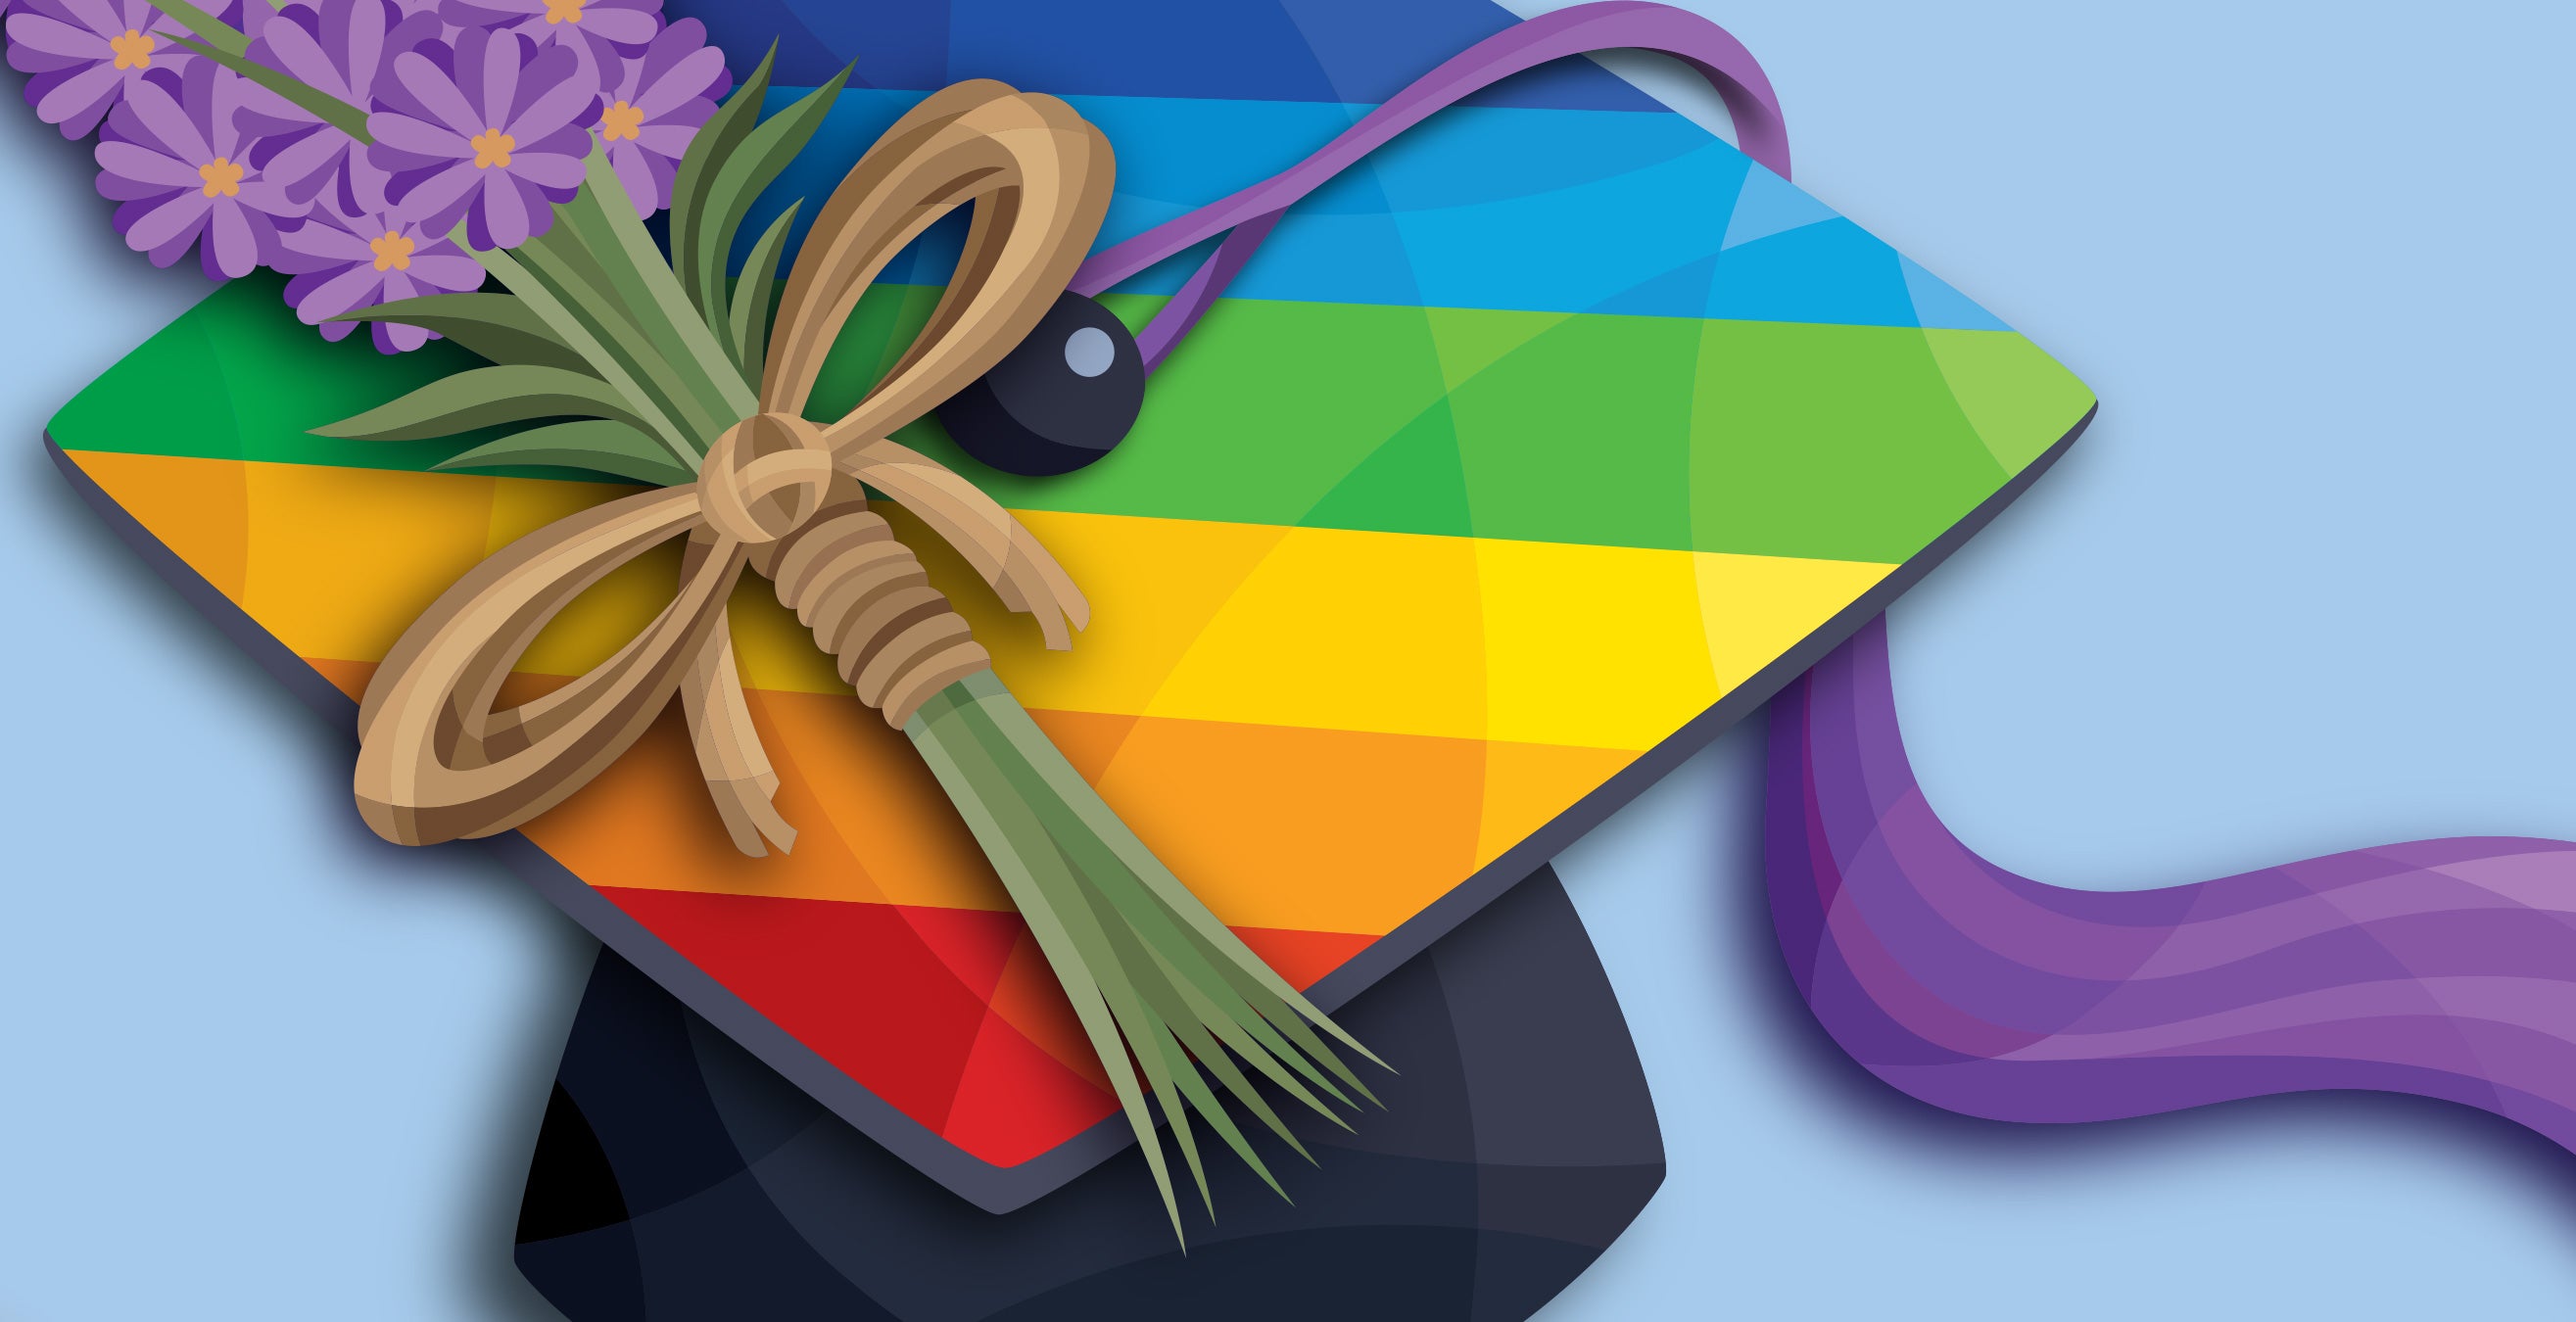 Rainbow graduation cap with lavender attached to the top